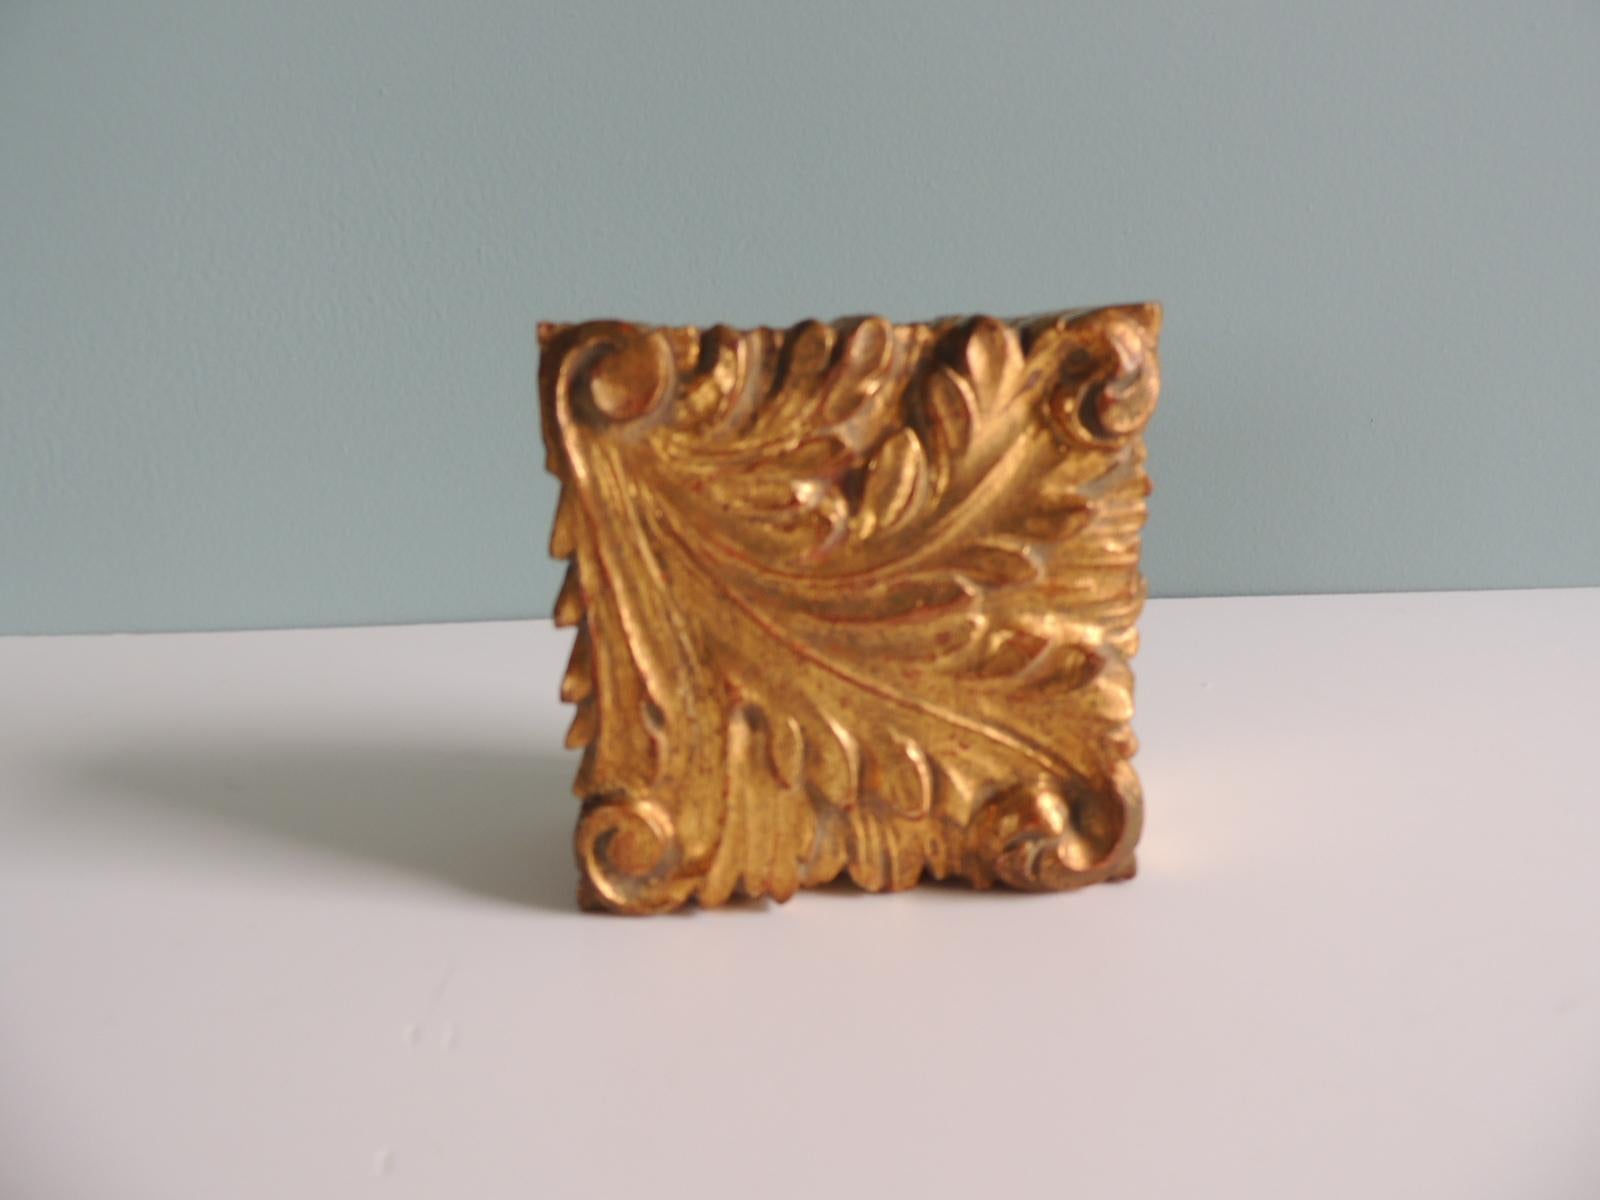 Vintage Gold Leaf Florentine Hand carved Decorative Wood Box with Acanthus Leaves Carved Lid
Size: 4.5 x 4.5 x 2.25